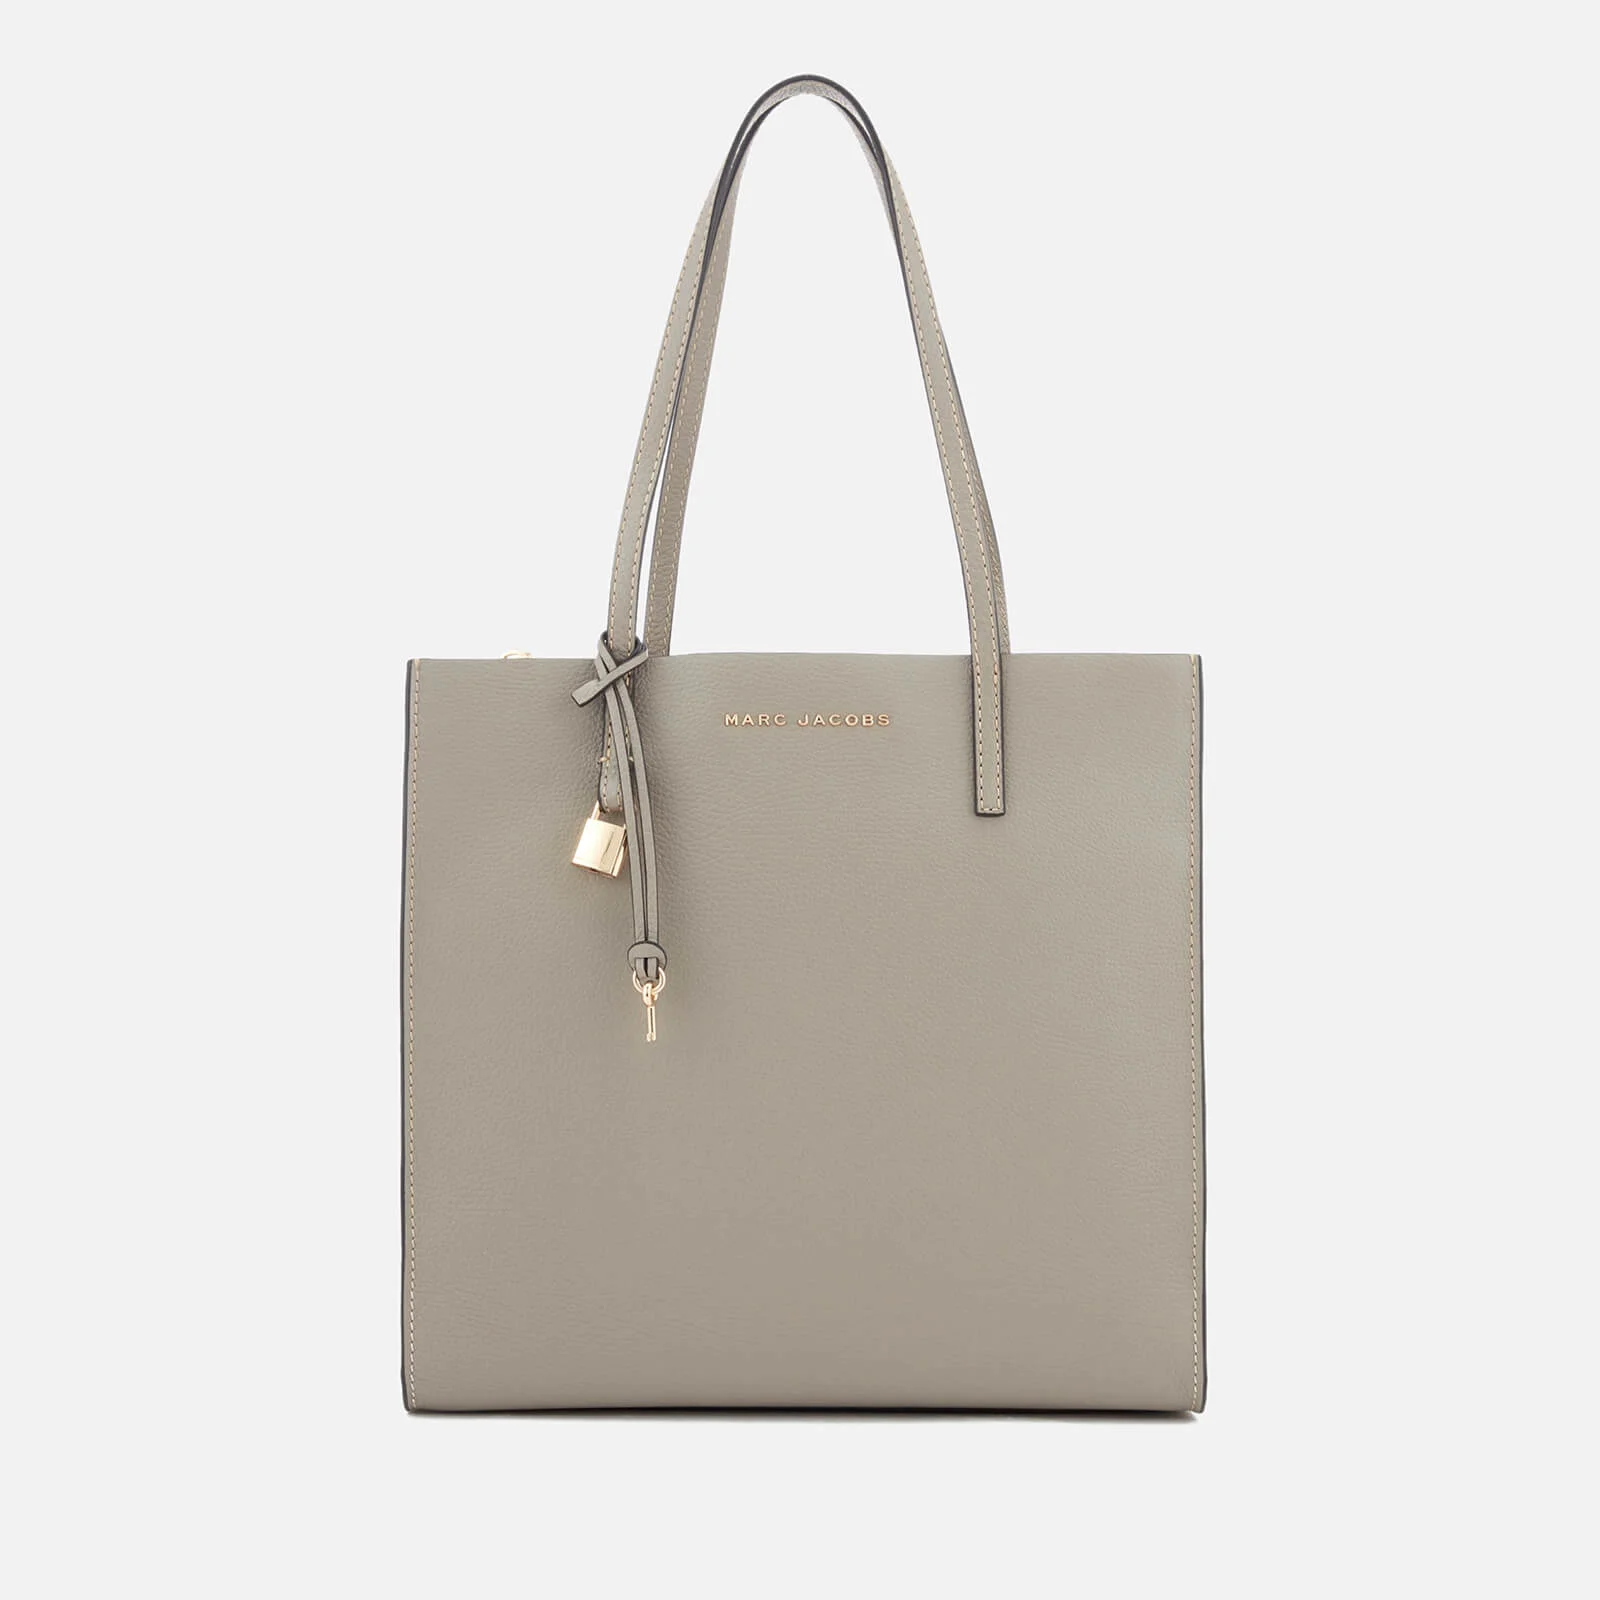 Marc Jacobs Women's The Grind Tote Bag - Stone Grey Image 1